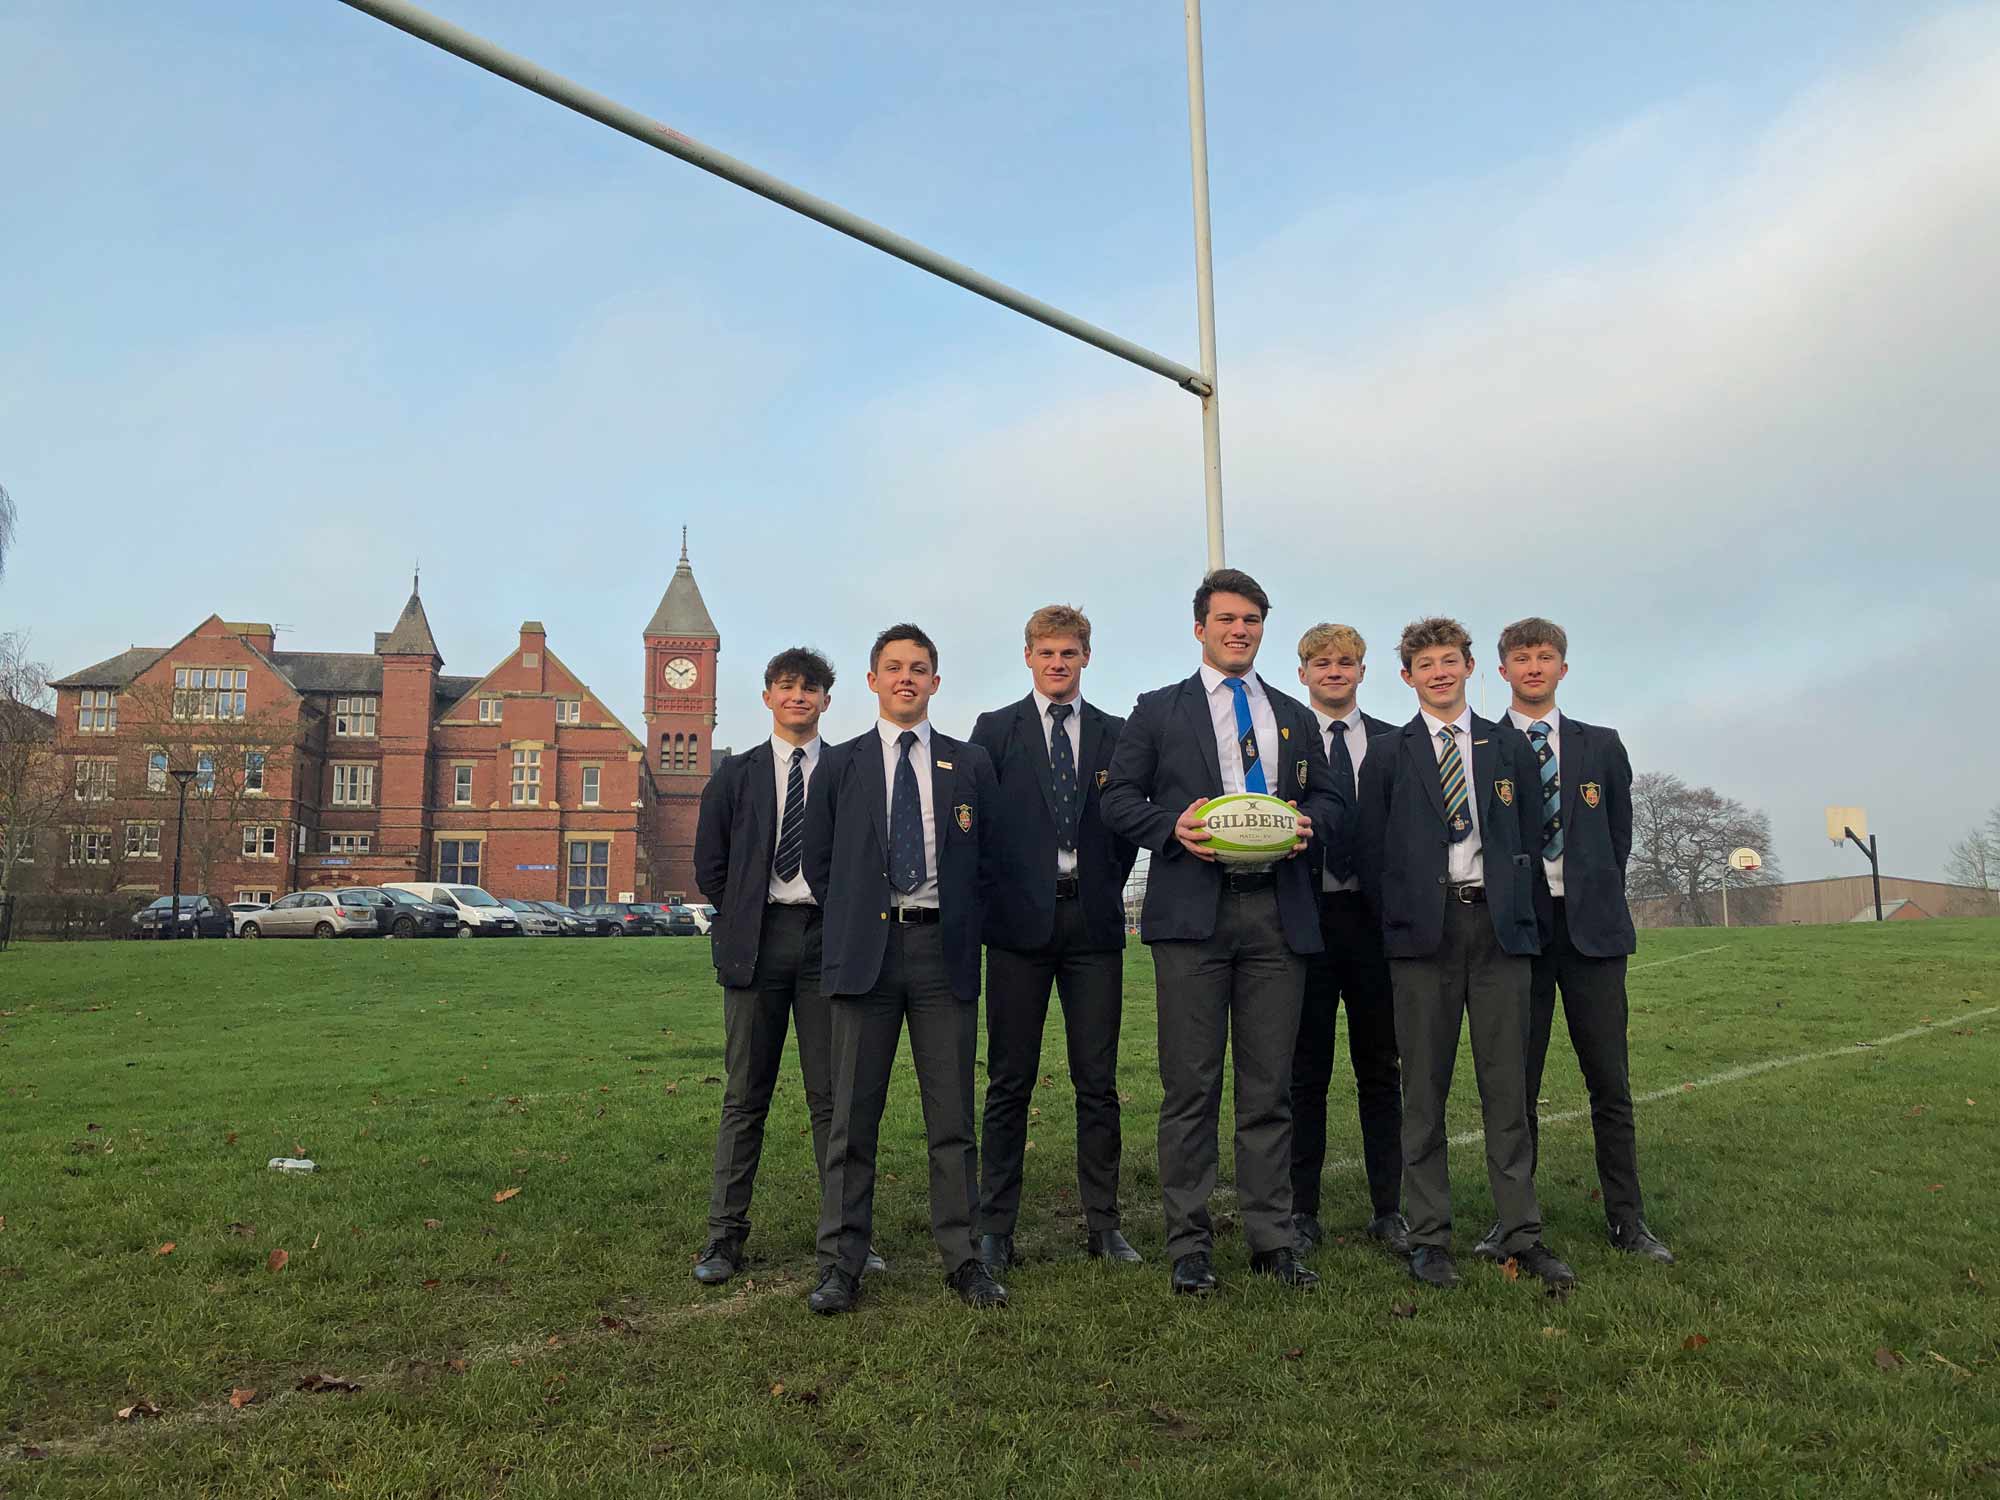 Seven boys from Ripon school talent-spotted by elite rugby club